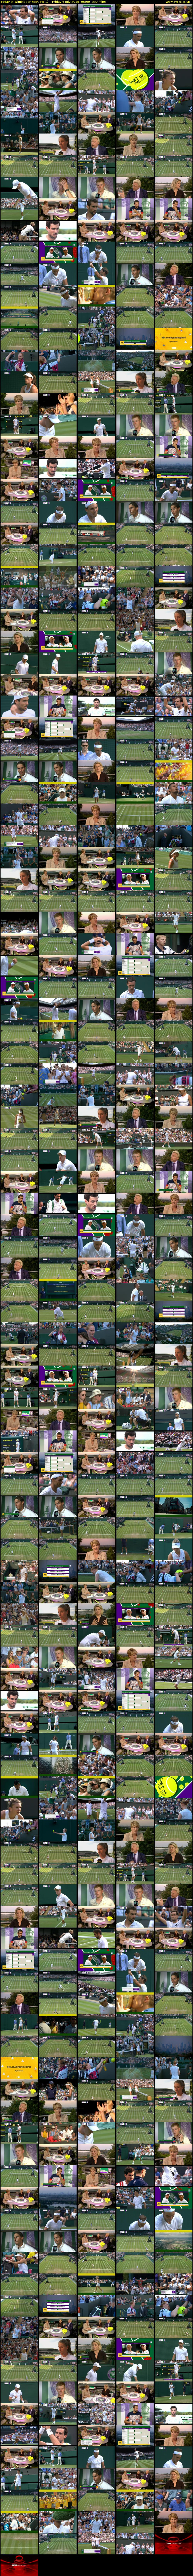 Today at Wimbledon (BBC RB 1) Friday 6 July 2018 06:00 - 11:30